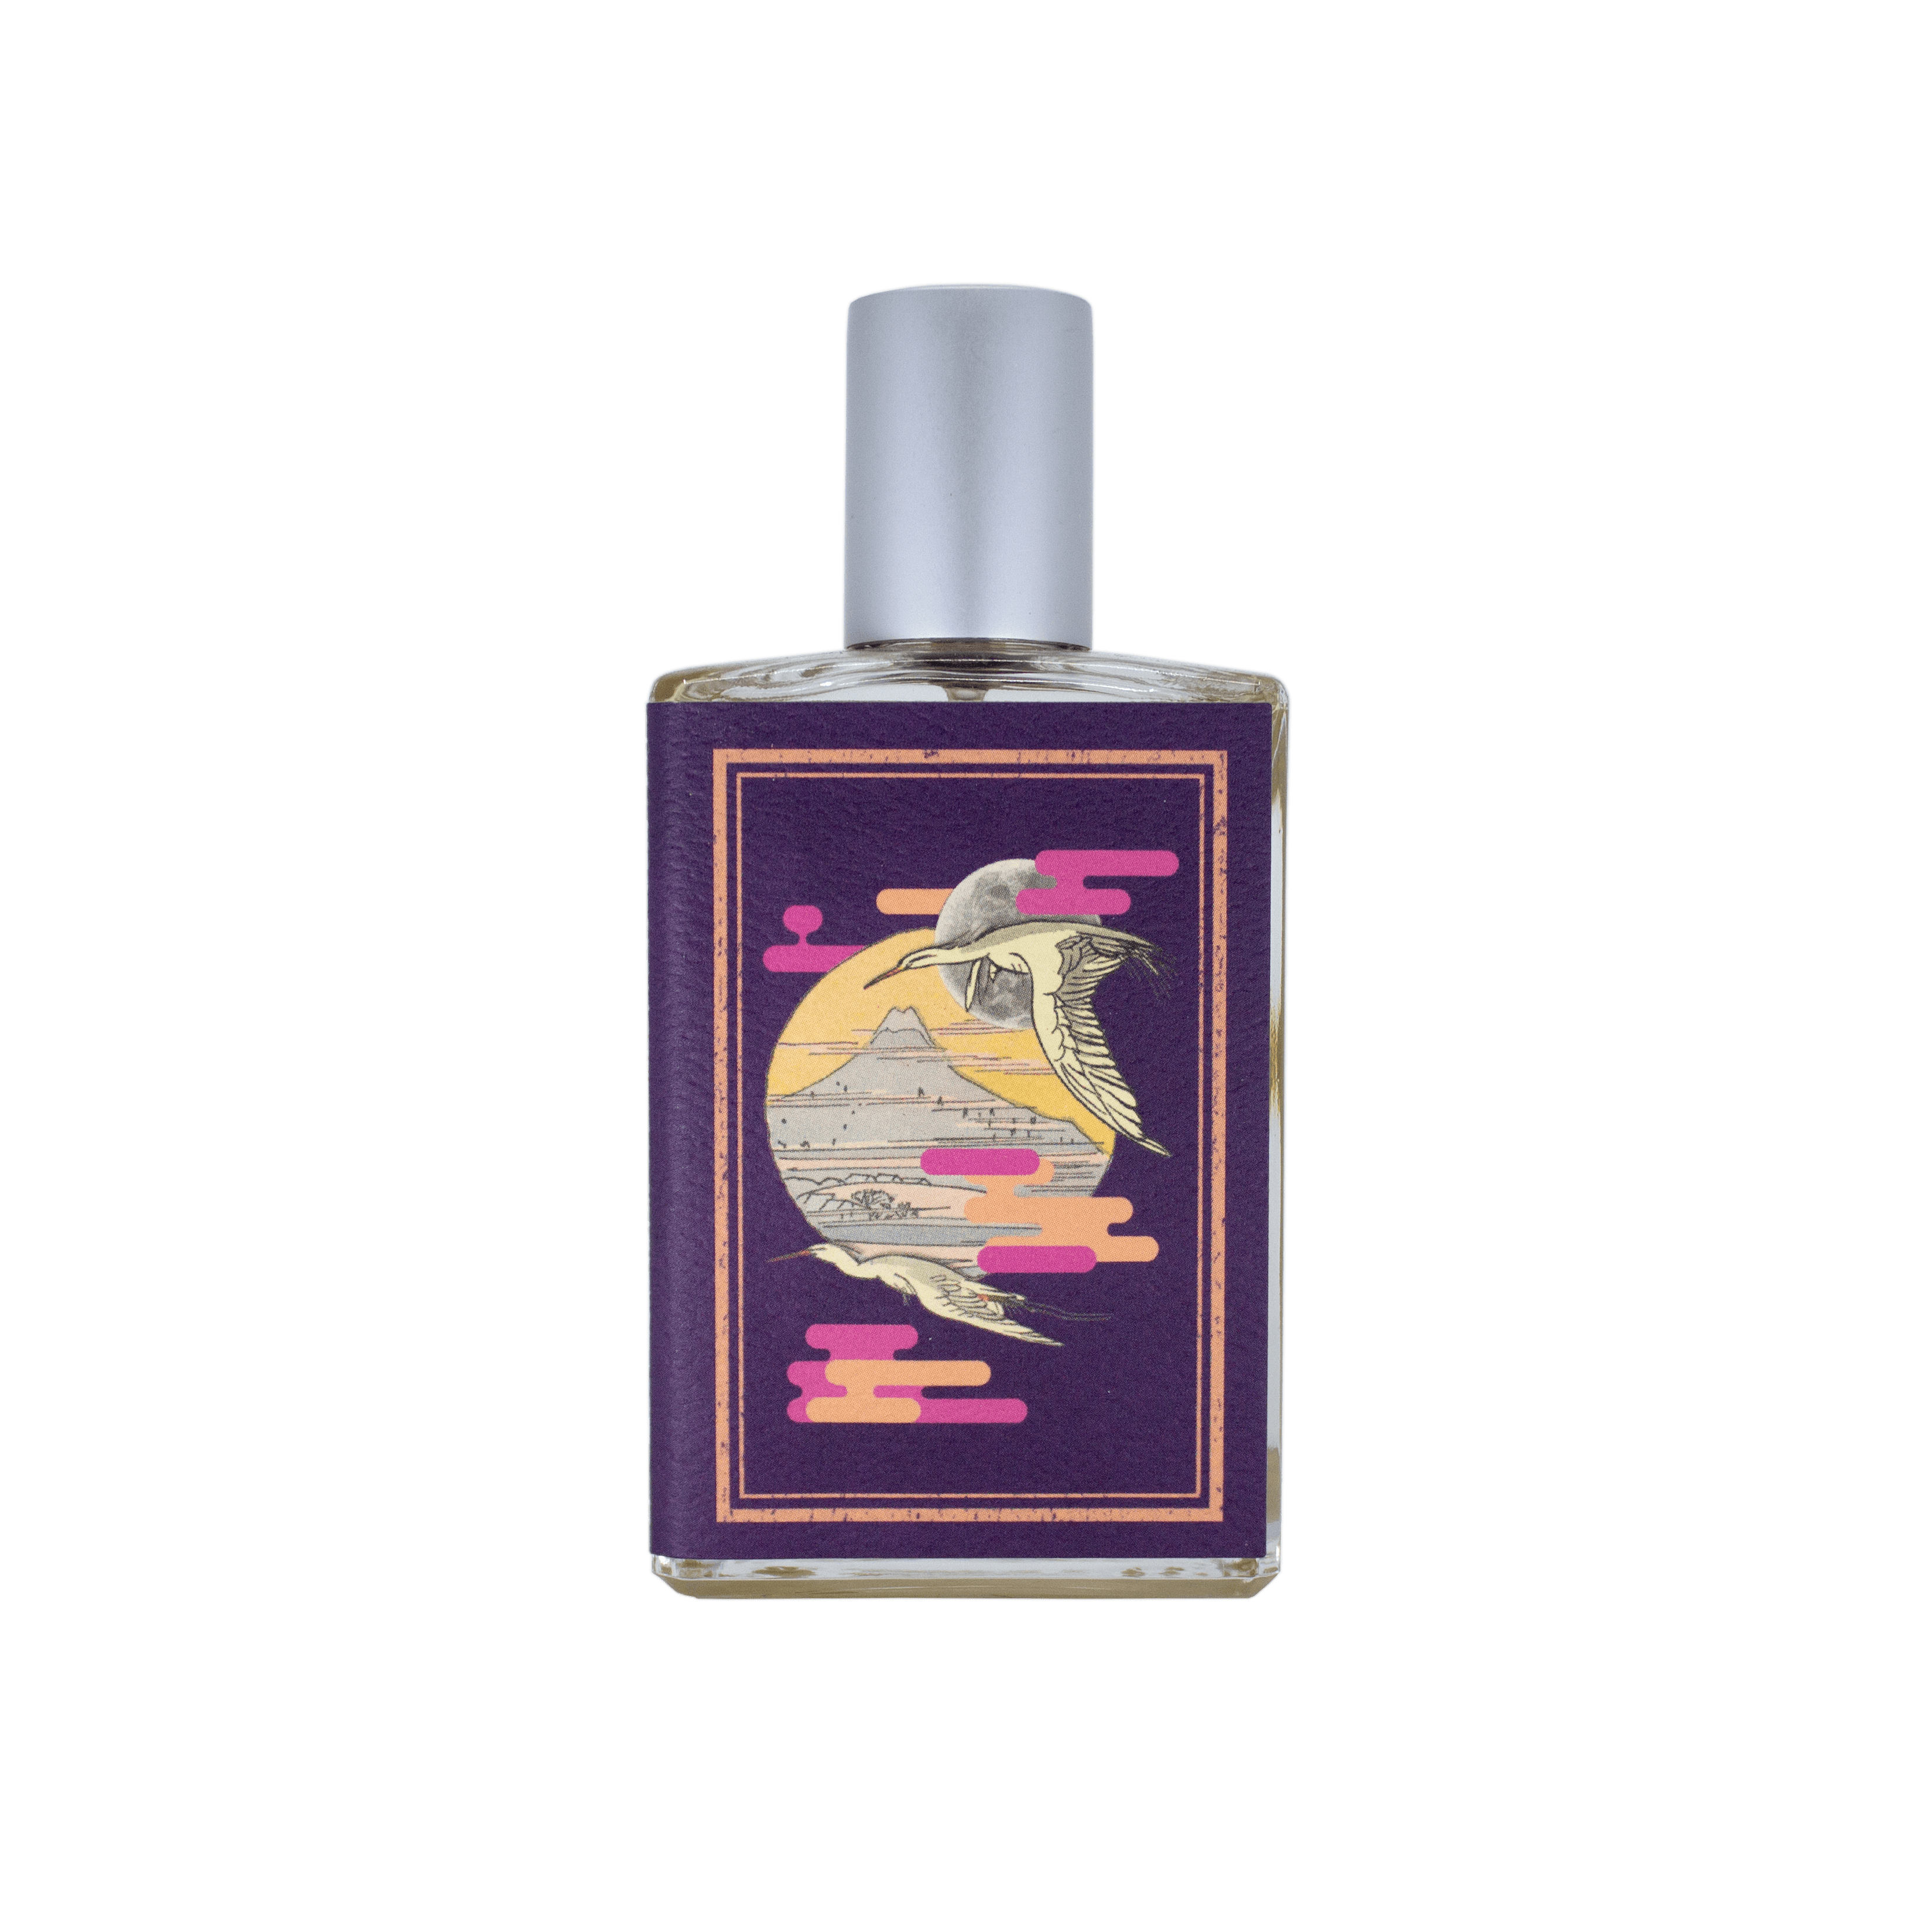 Imaginary Authors - O Unknown | Perfume Lounge